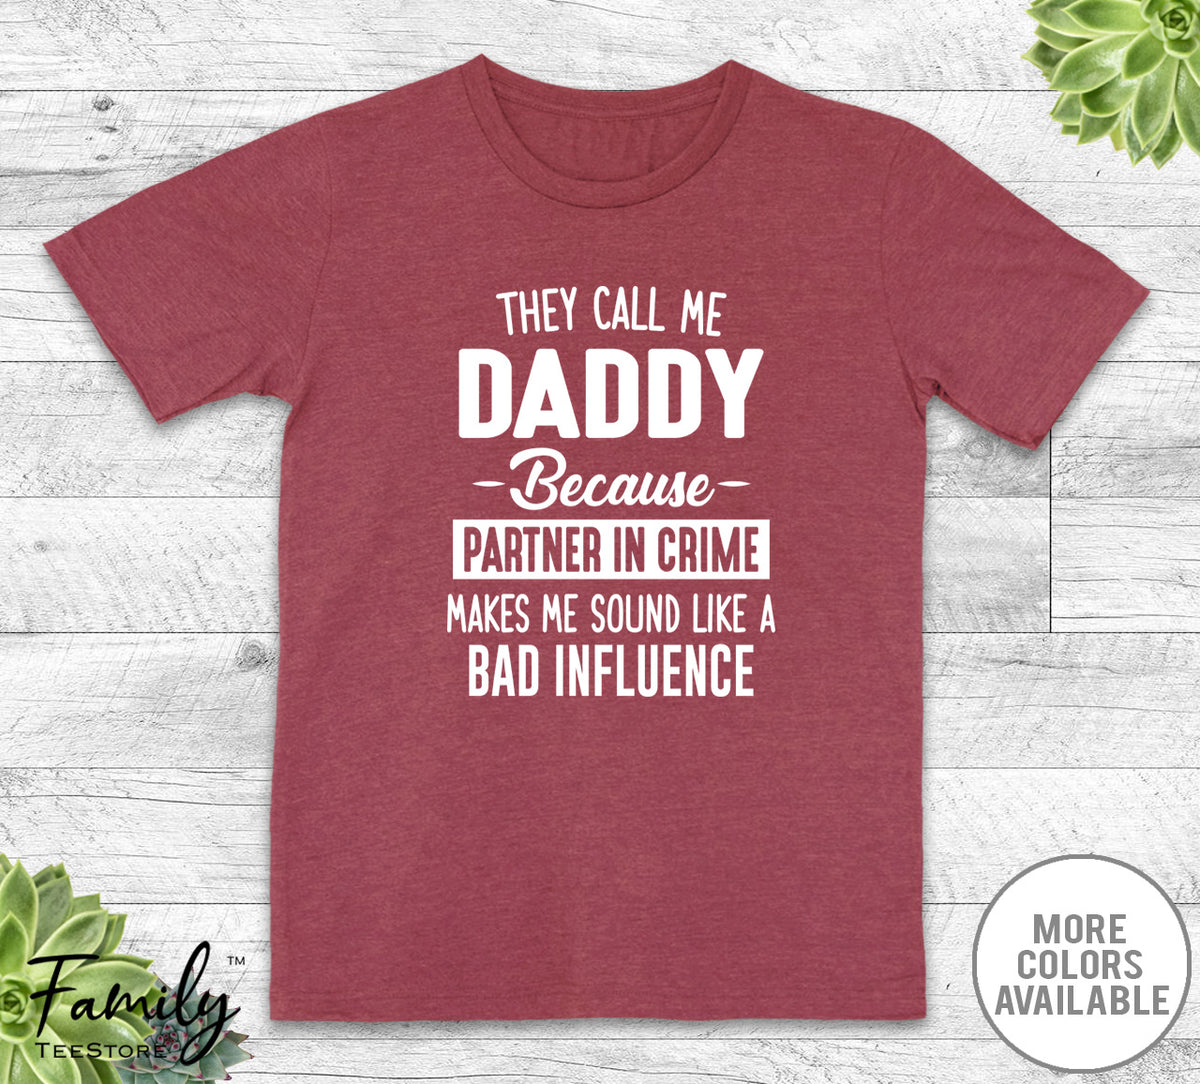 They Call Me Daddy Because Partner In Crime... - Unisex T-shirt - Daddy Shirt - Daddy Gift - familyteeprints